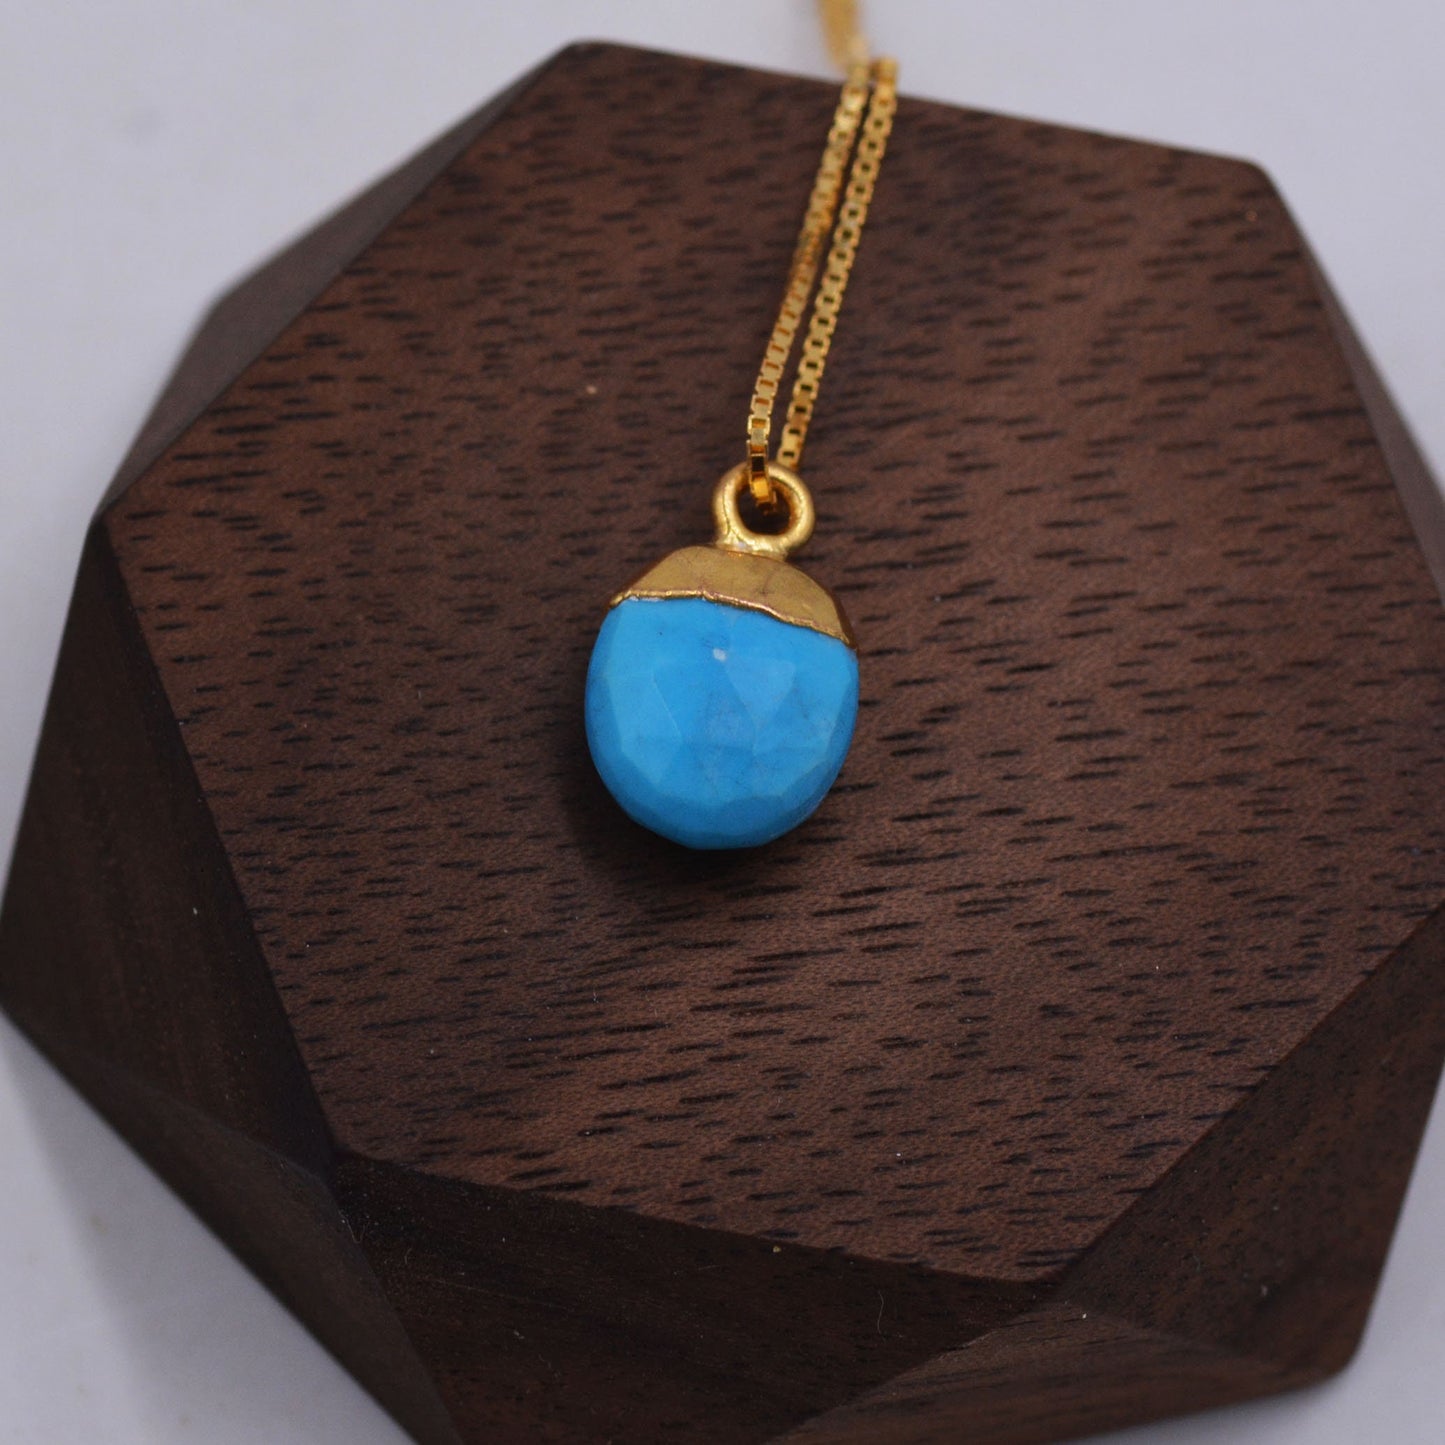 Dainty Gold Dipped Turquoise Stone Pendant Necklace in Sterling Silver, Droplet Faceted Natural Gemstone Jewellery, Delicate and Petite